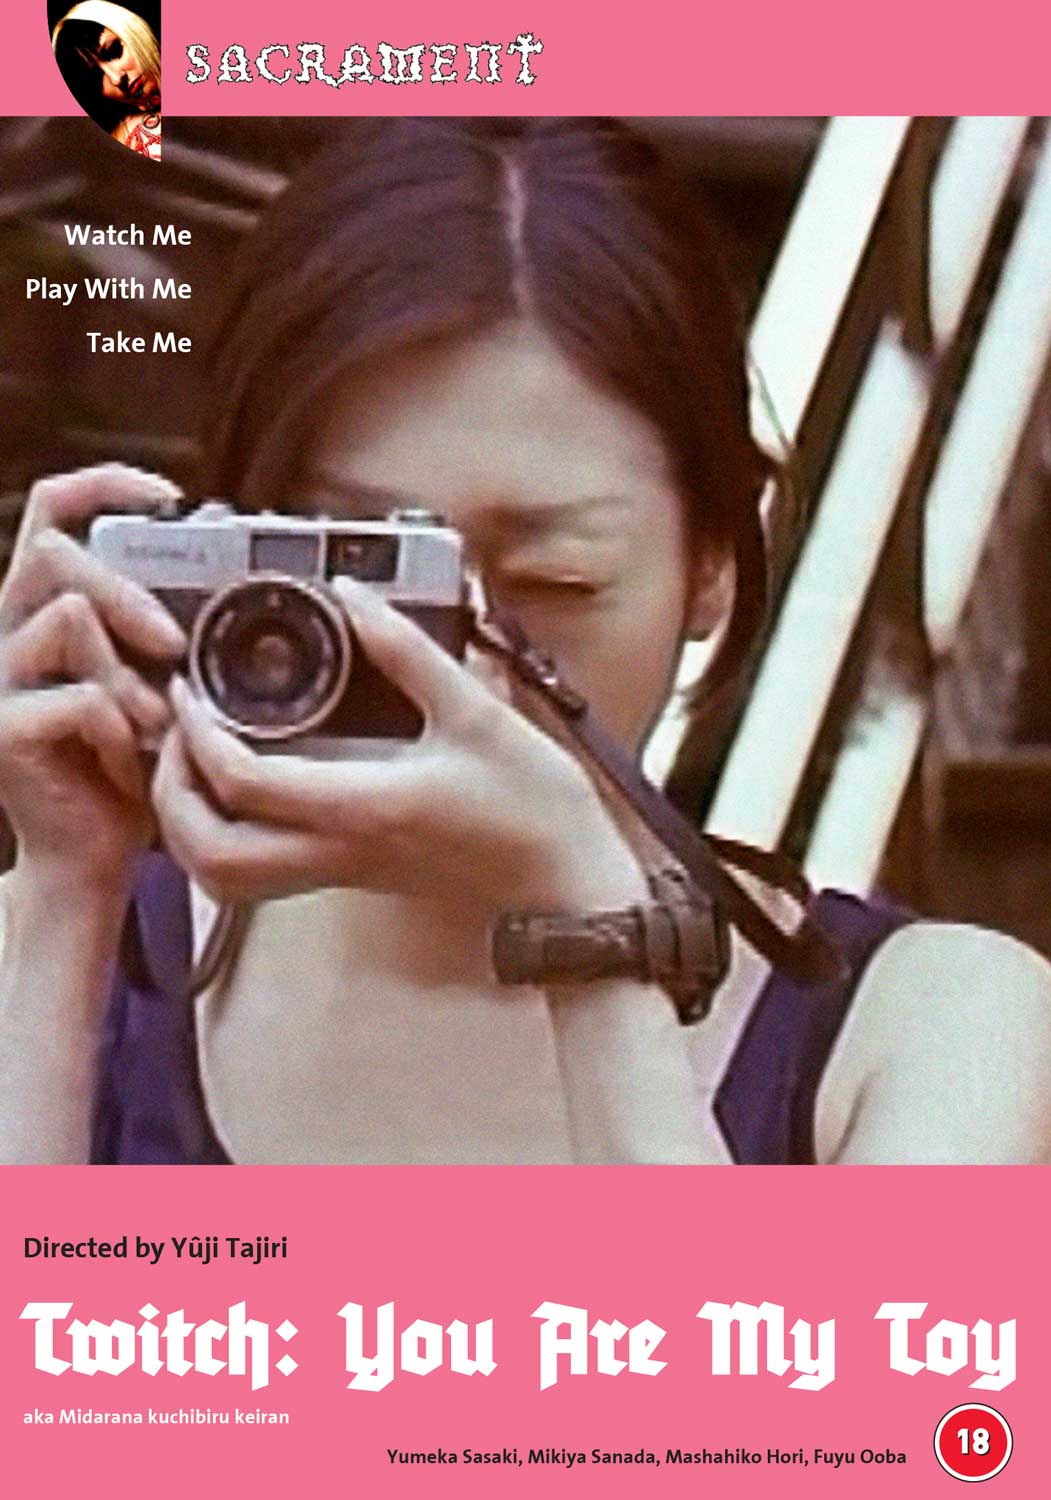 DVD style cover for streaming release of Pinku film Twitch: You Are My Toy